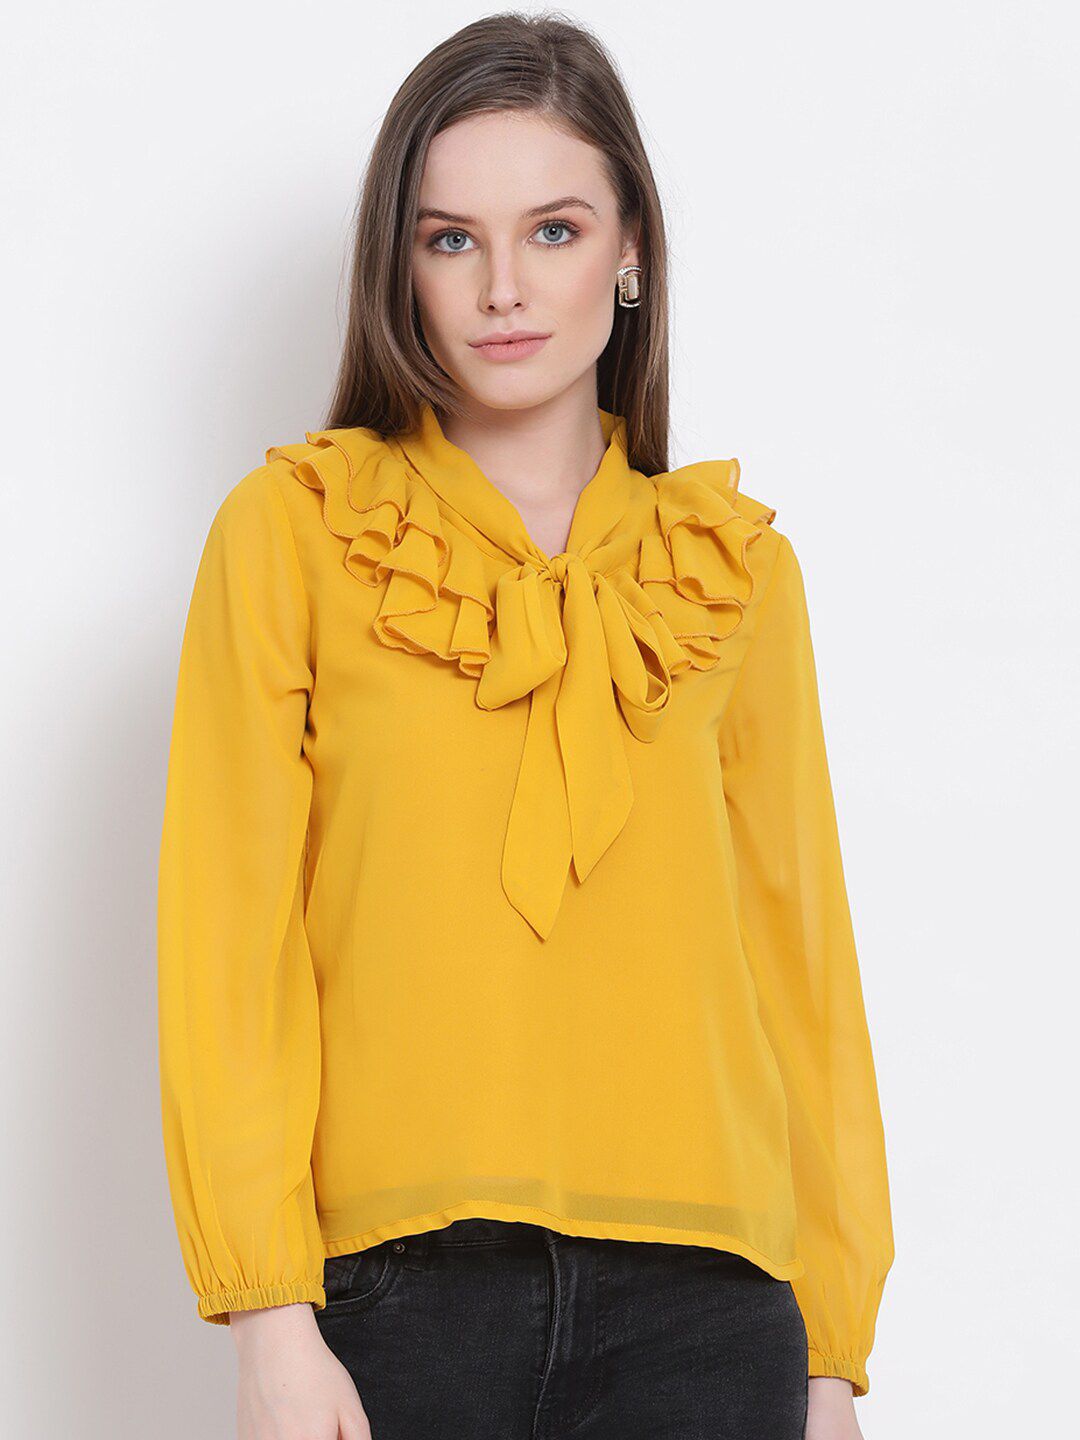 DRAAX Fashions Yellow Tie-Up Neck Ruffles Georgette Top Price in India